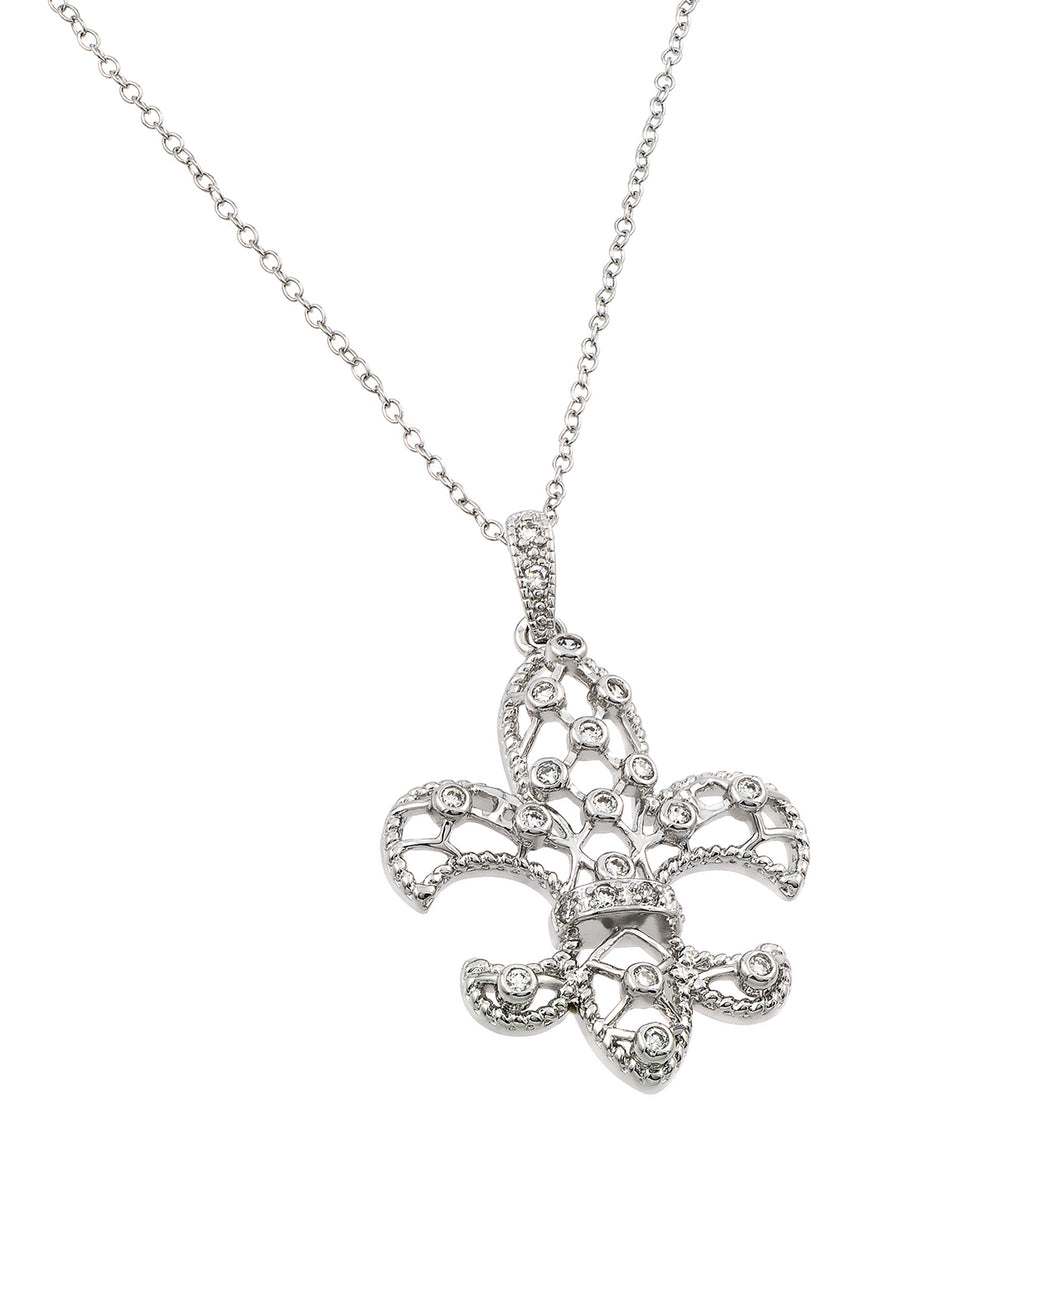 .925 Sterling Silver Rhodium Plated Open Fleur De Lis Cubic Zirconia Necklace 18 Inches